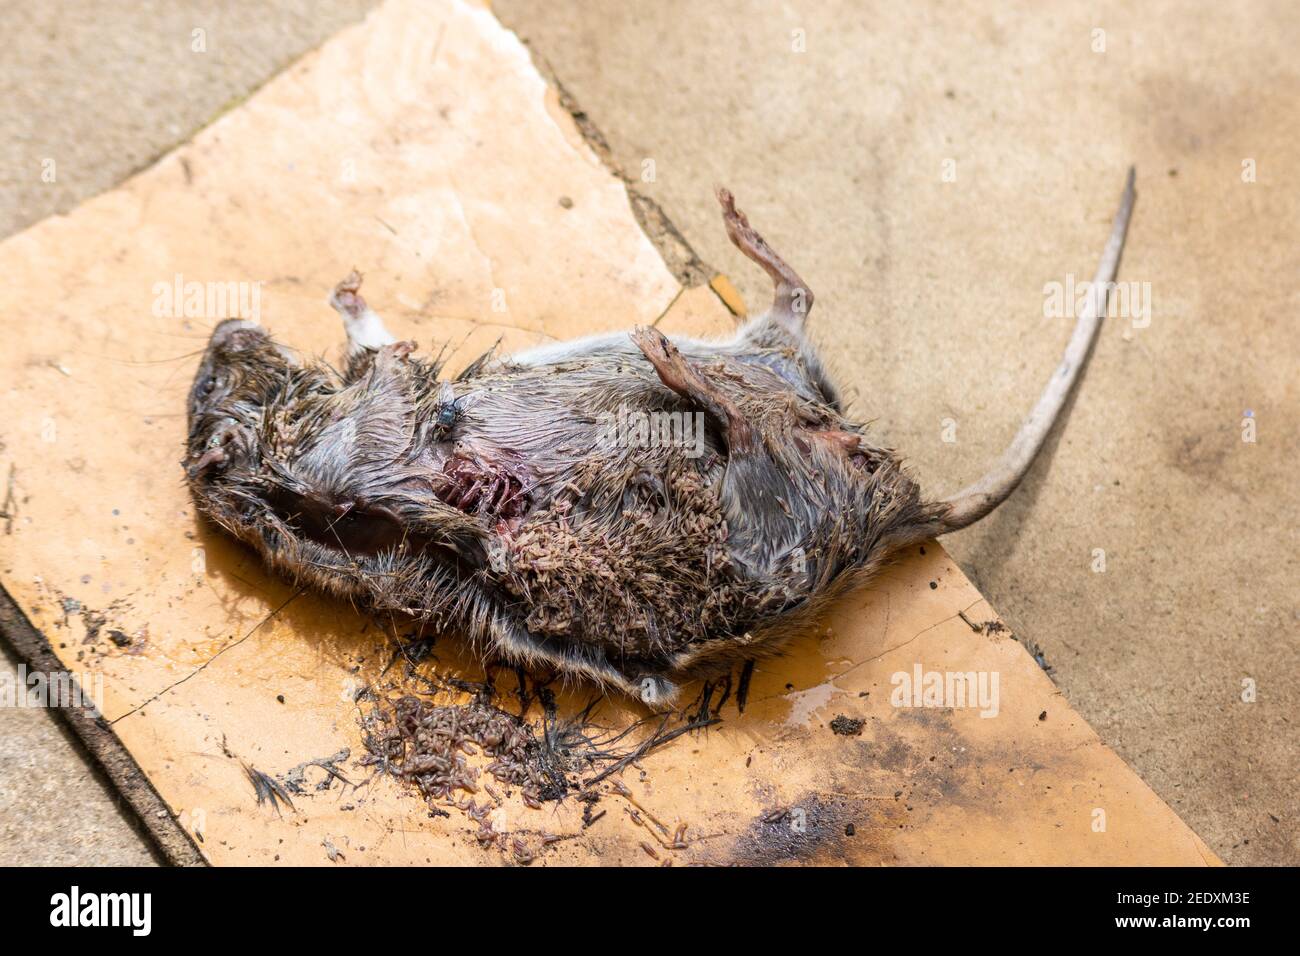 A dead decomposing brown rat, Rattus norvegicus, on rough boards with extensive maggot activity and a single fly feeding Stock Photo